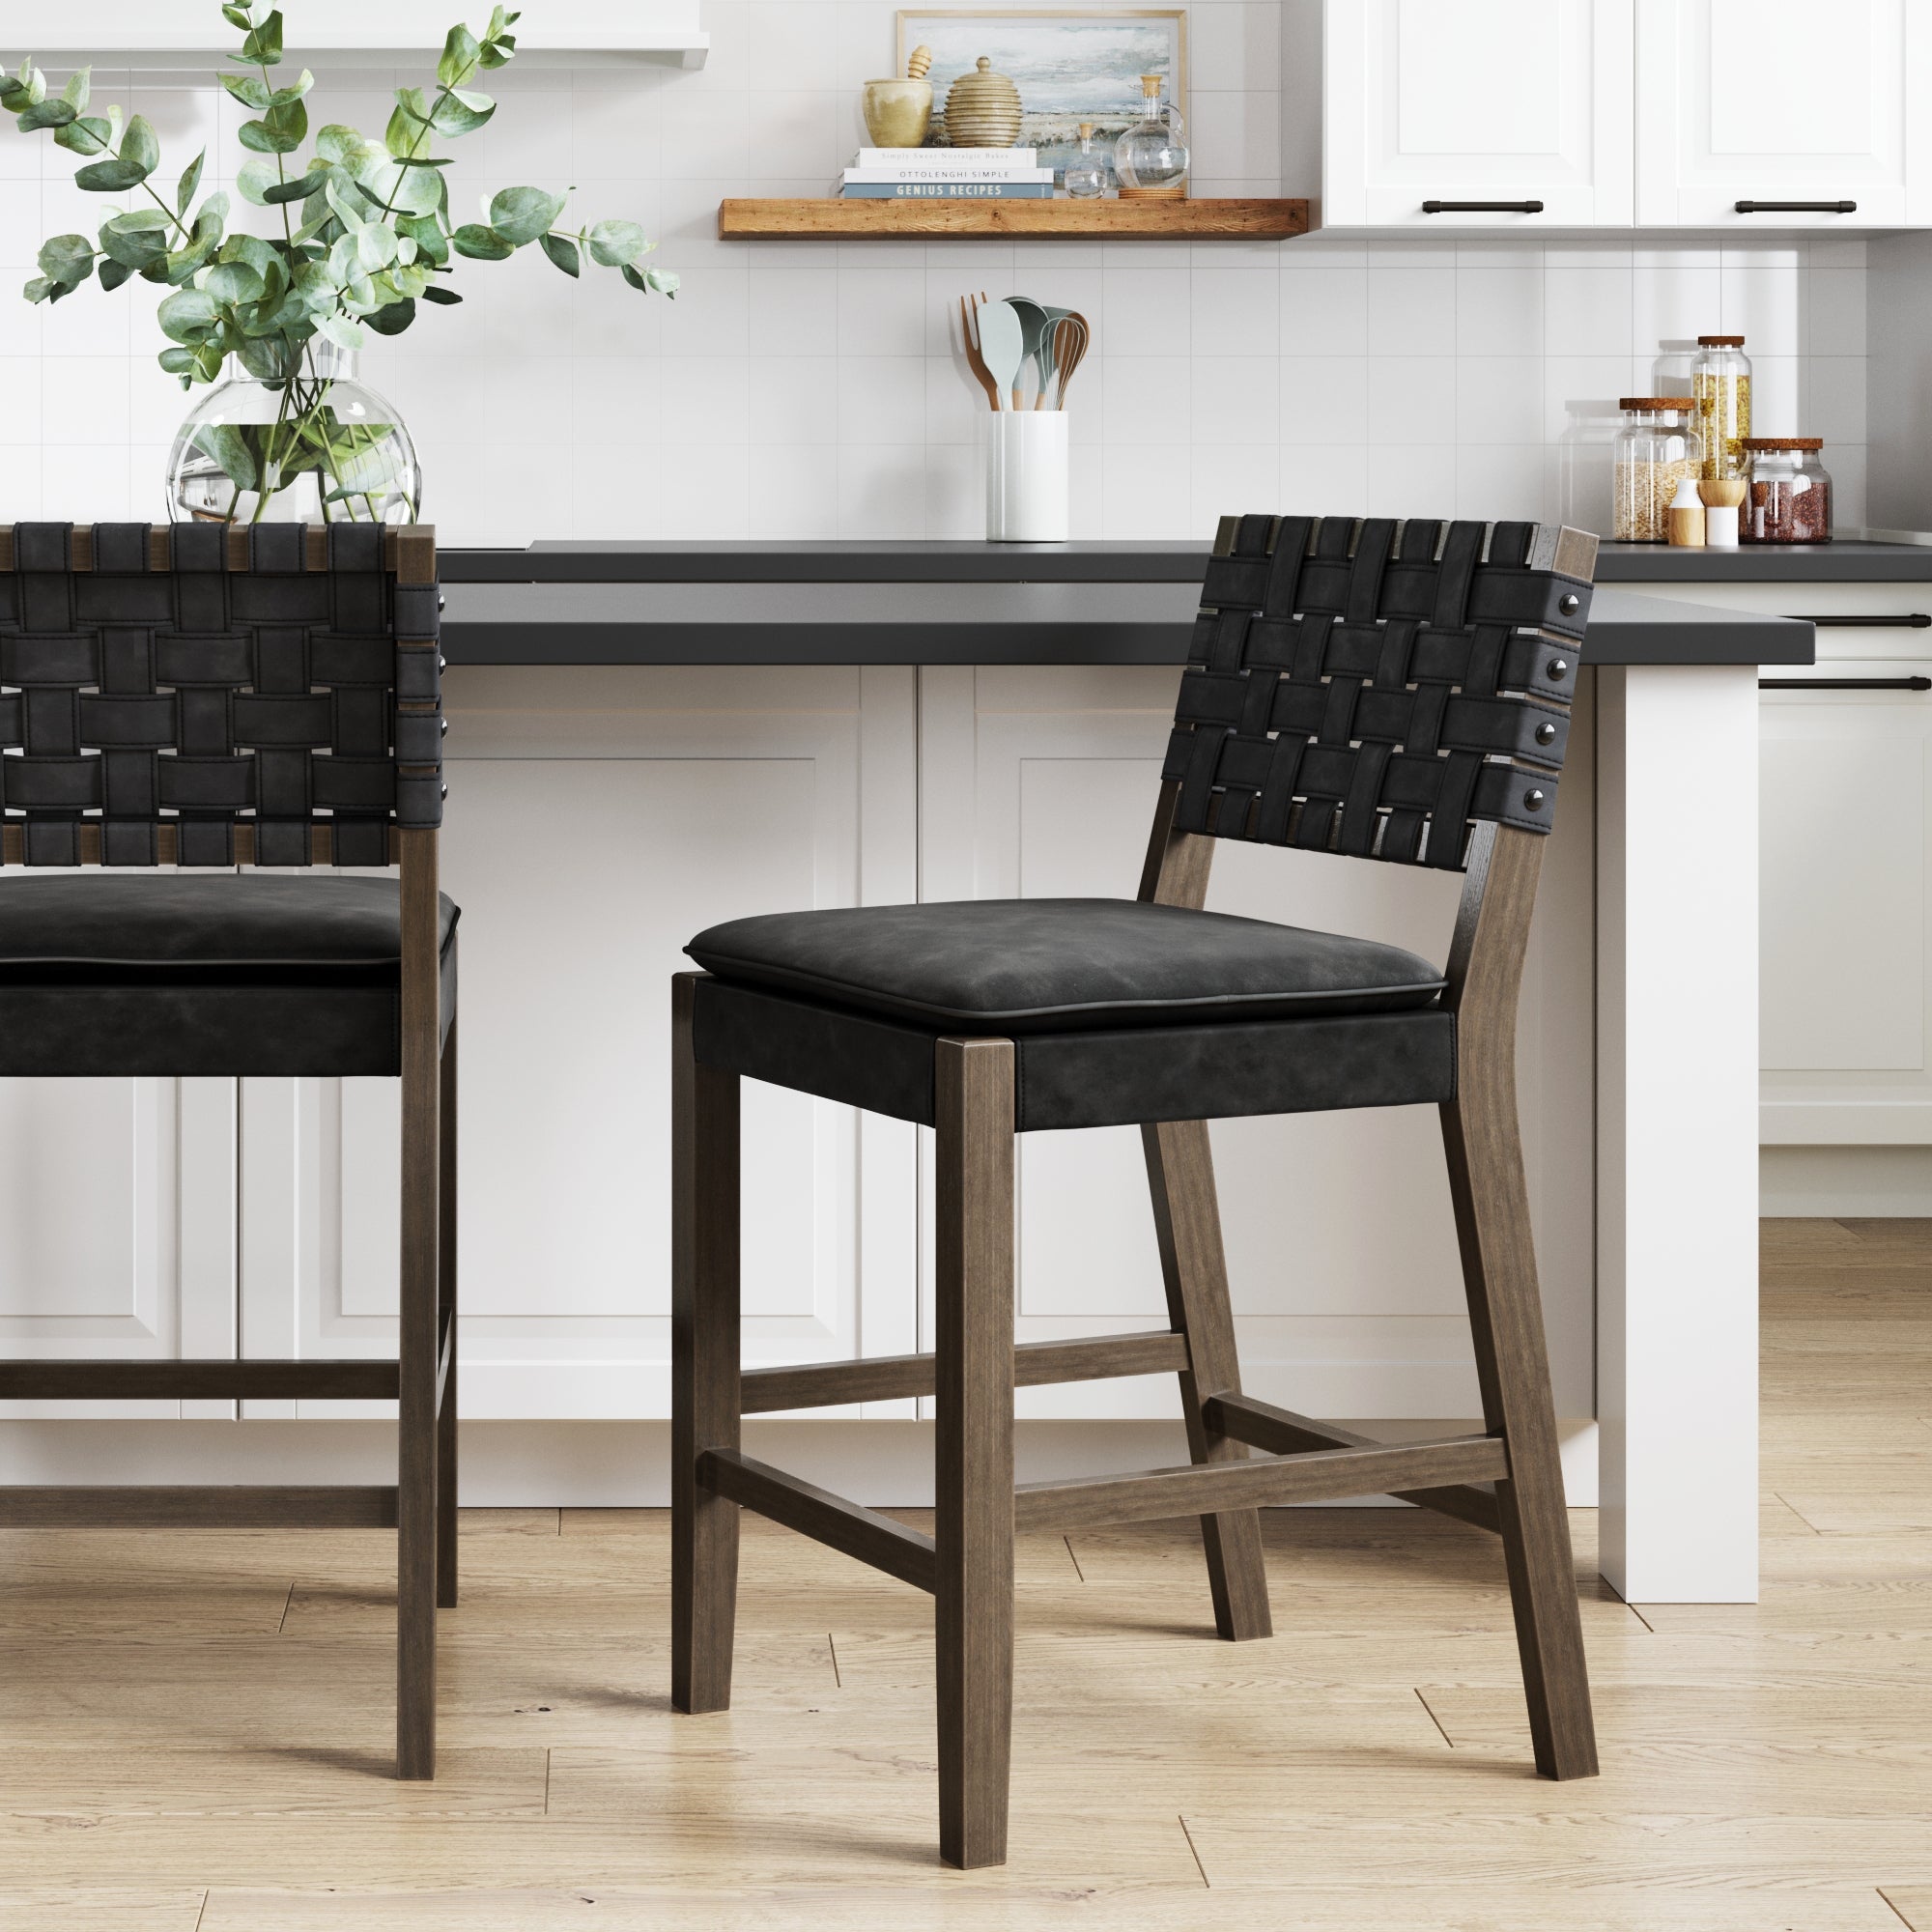 Woven Faux Leather Counter Bar Stool Black